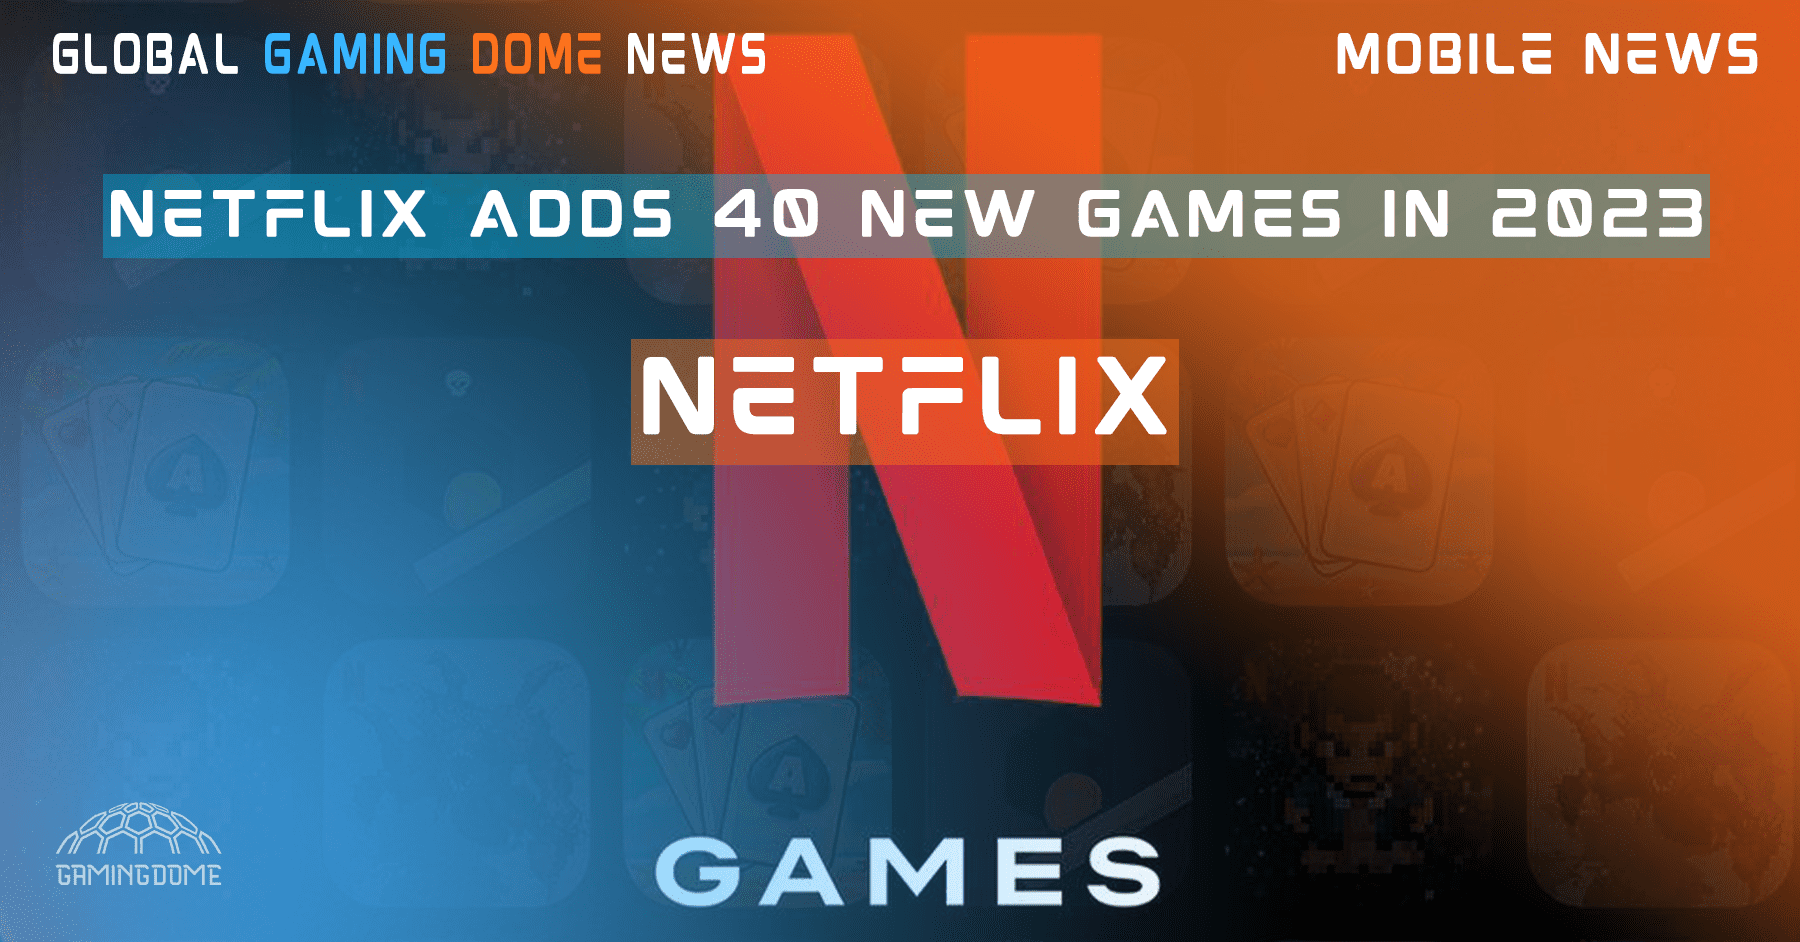 NETFLIX ADDS 40 NEW GAMES IN 2023